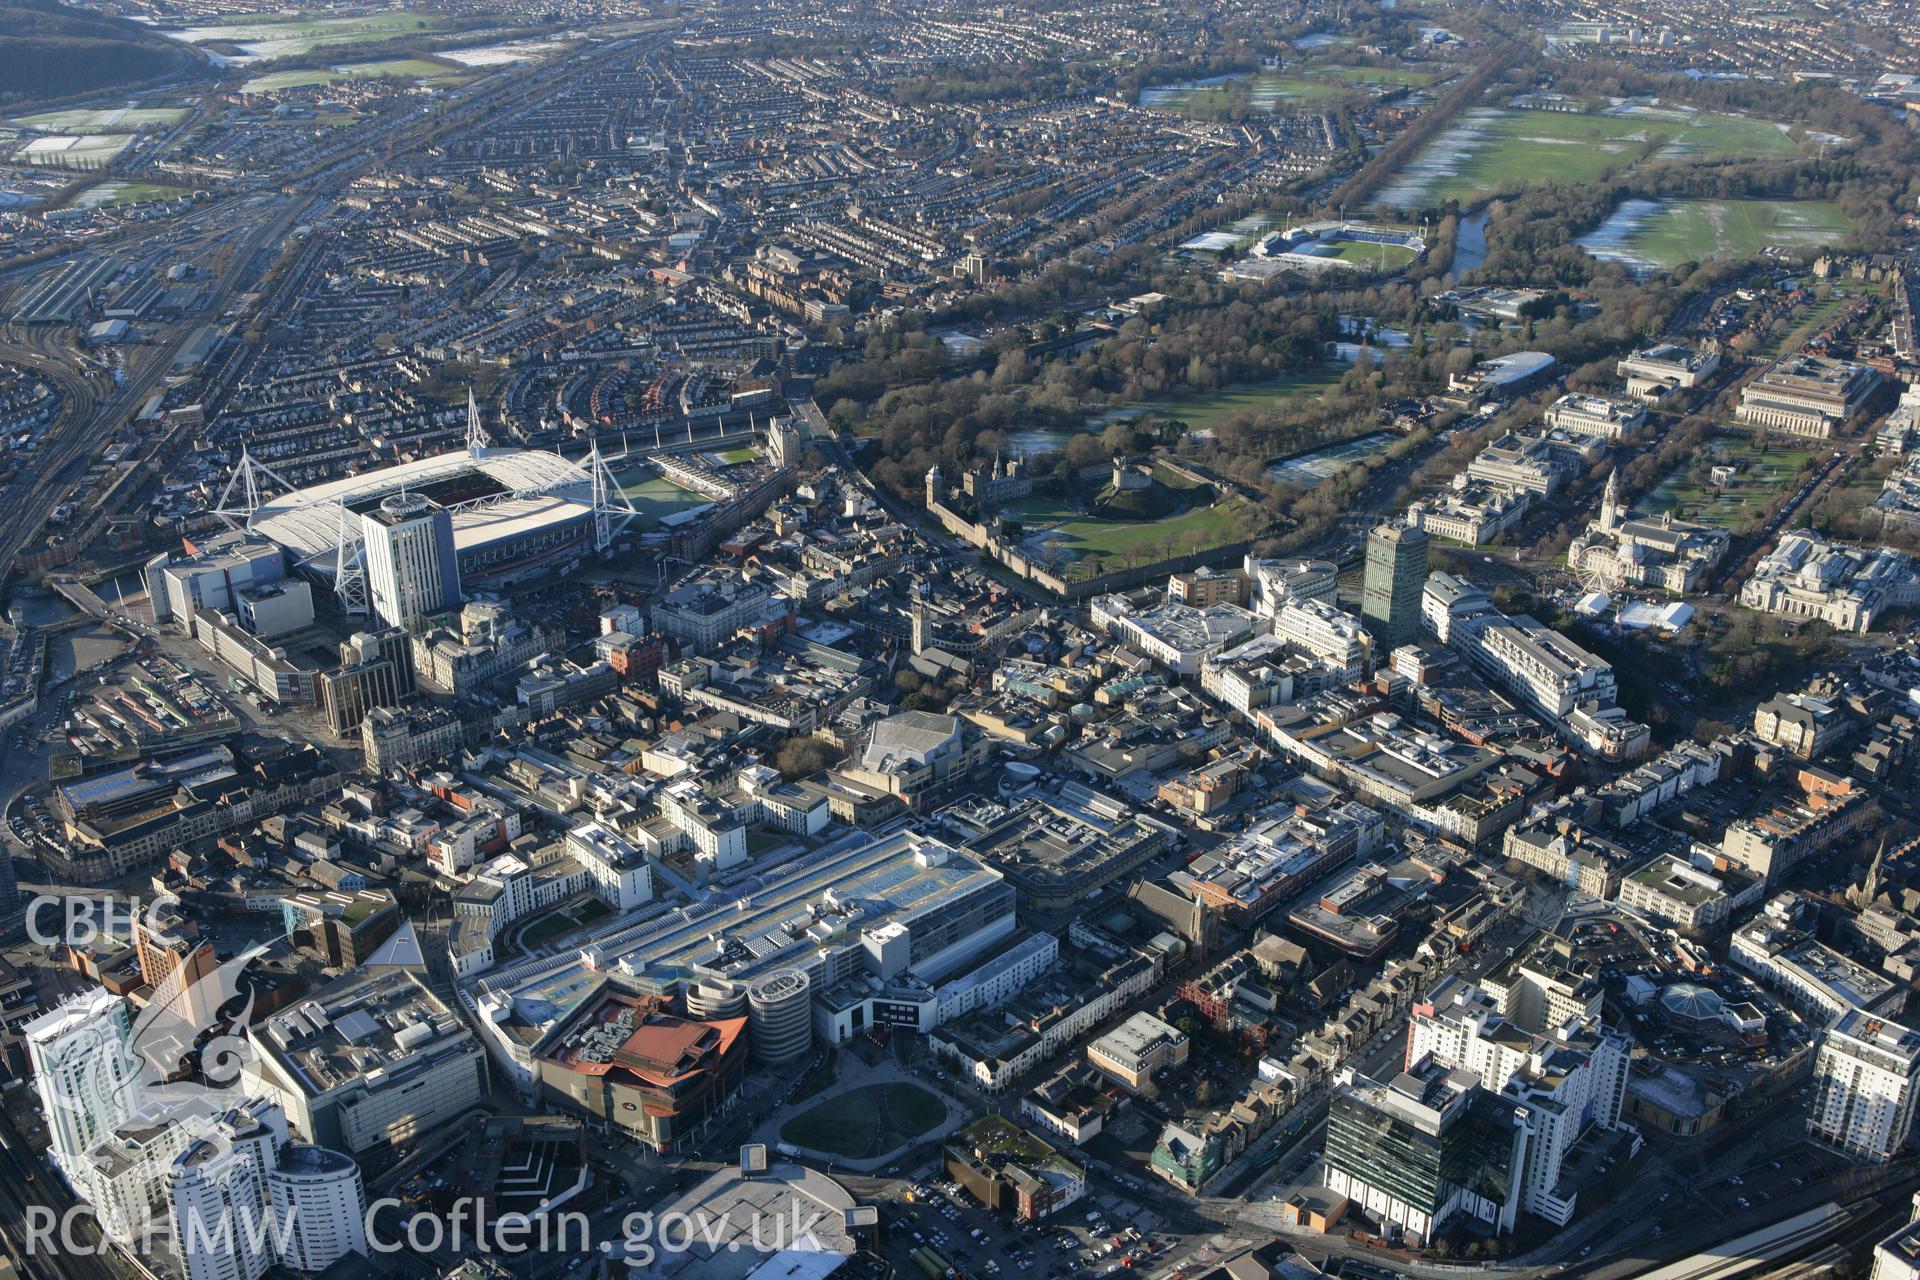 RCAHMW colour oblique photograph of Cardiff city centre from the east, showing the Millenium Stadium. Taken by Toby Driver on 08/12/2010.